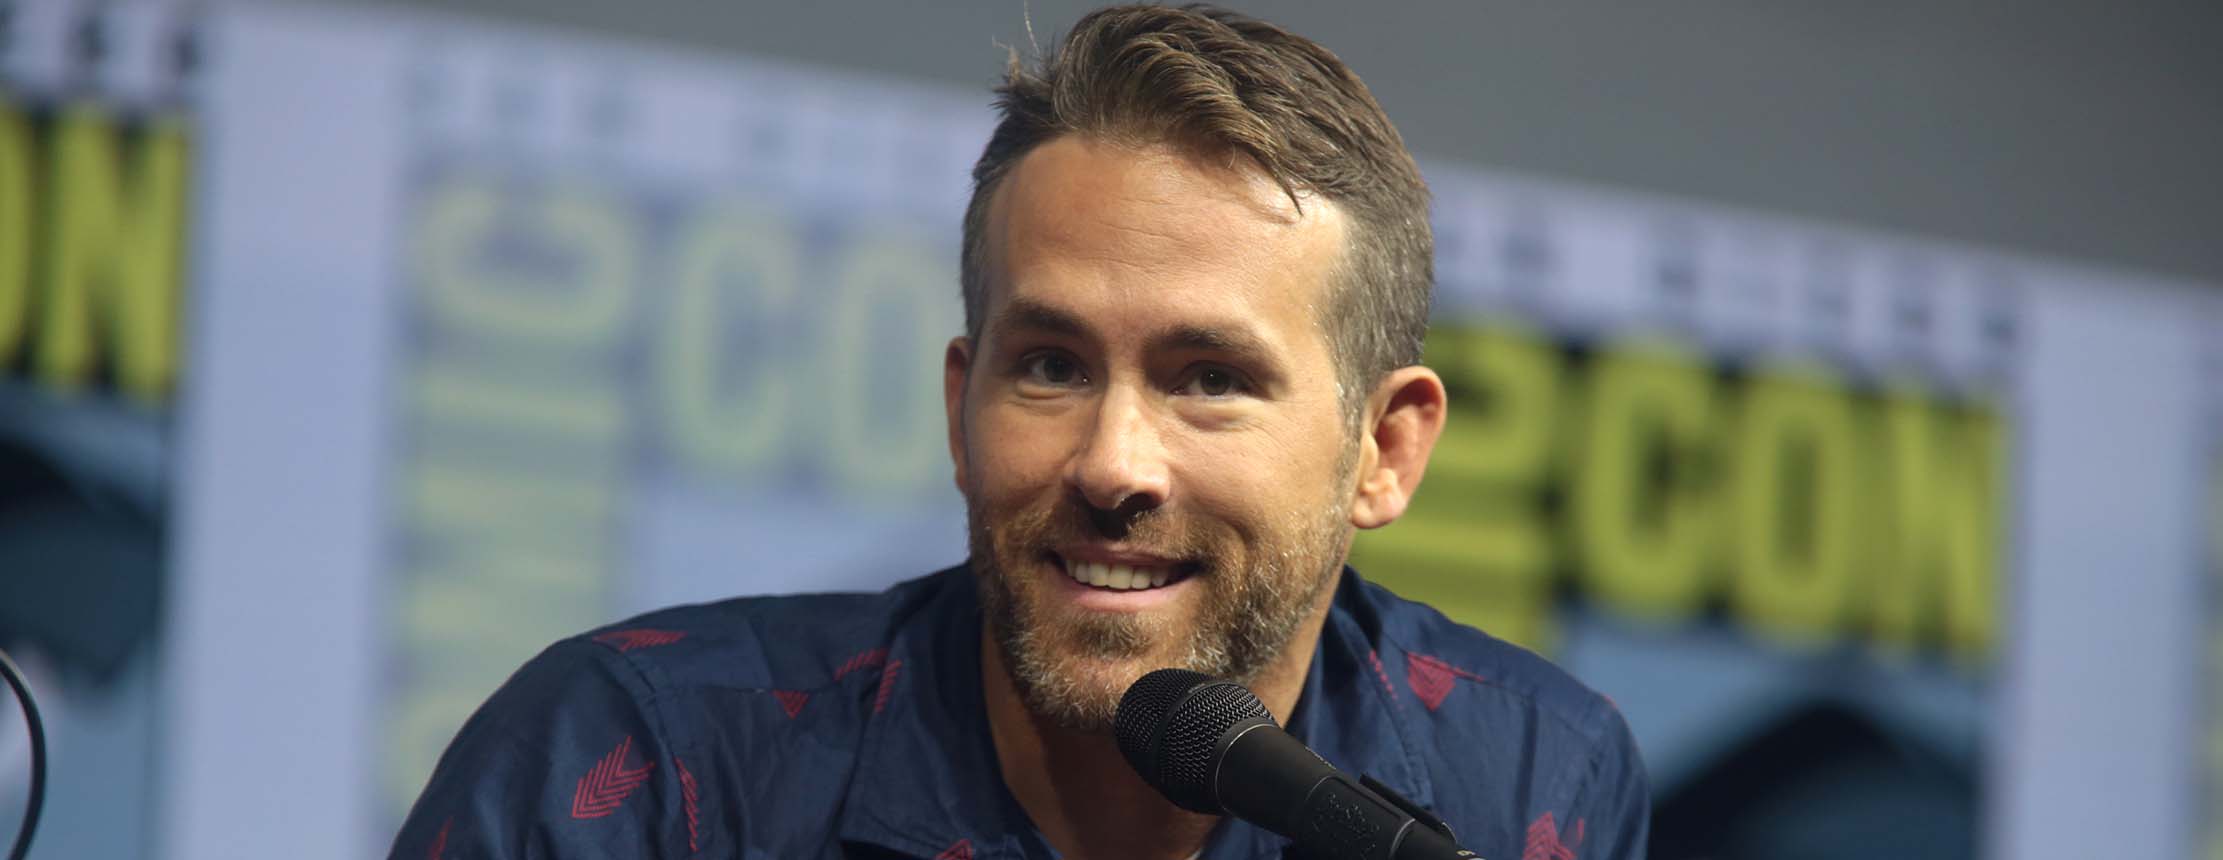 Get fit in 2023 with ryan reynolds workout routine